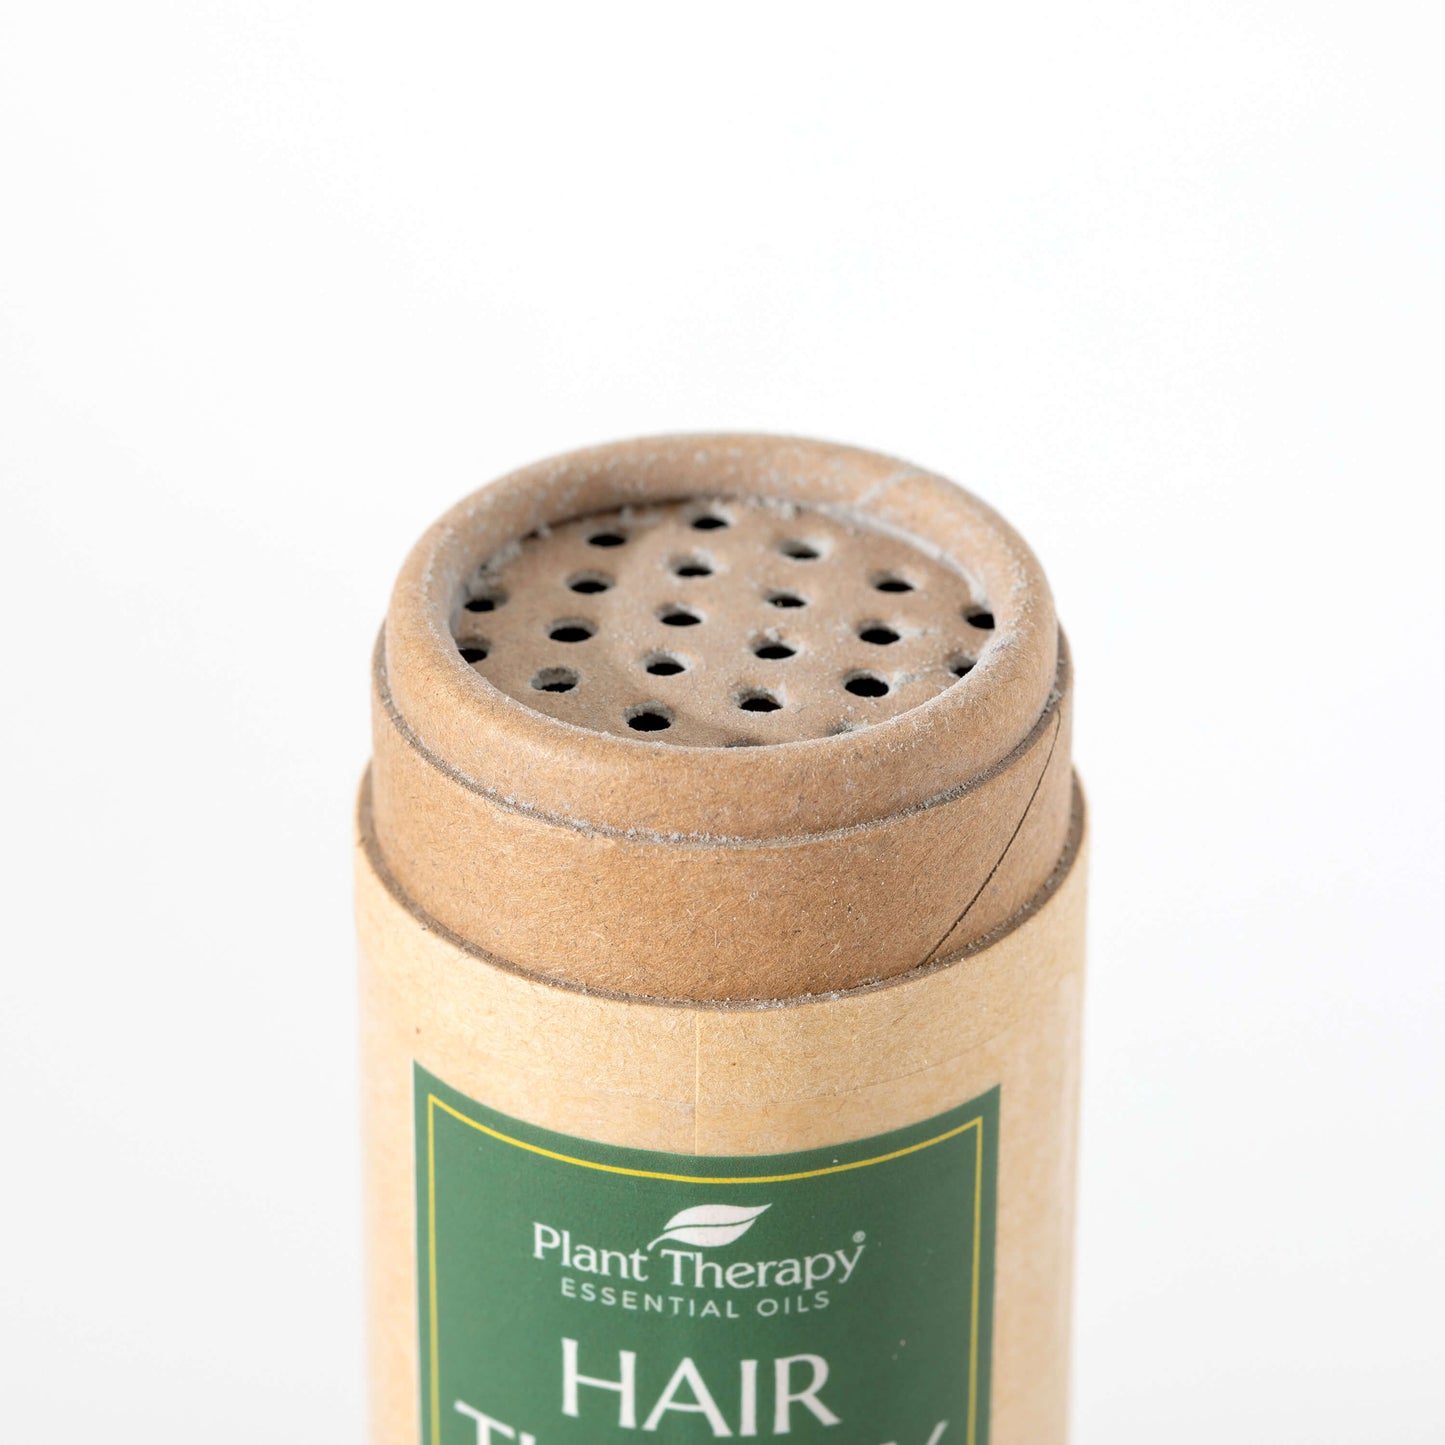 Plant Therapy Dry Shampoo container